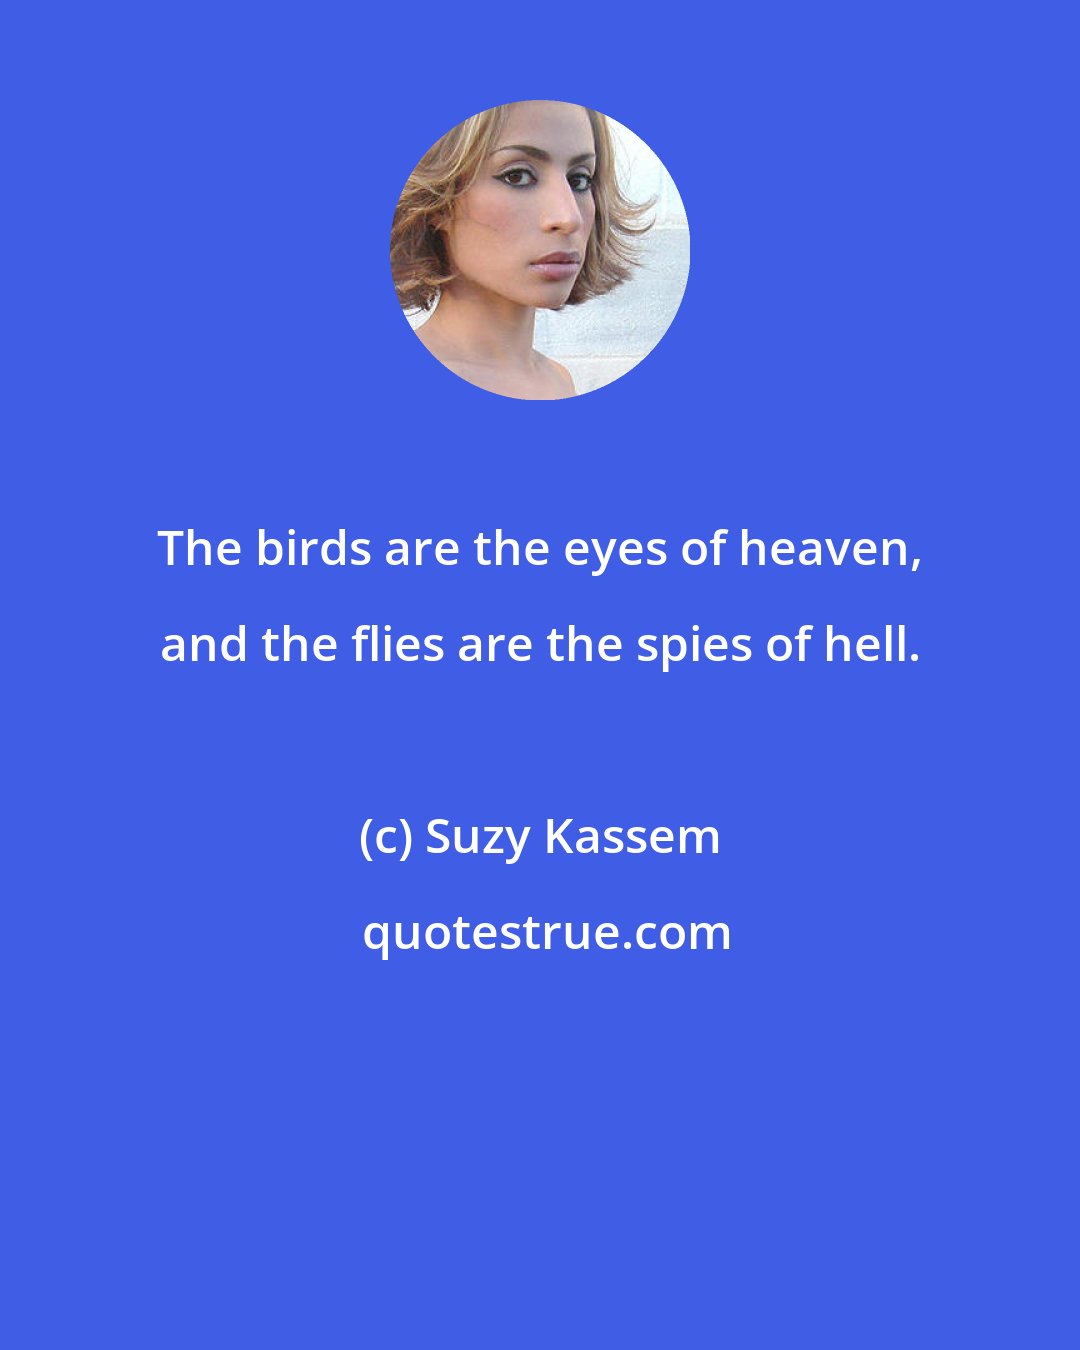 Suzy Kassem: The birds are the eyes of heaven, and the flies are the spies of hell.